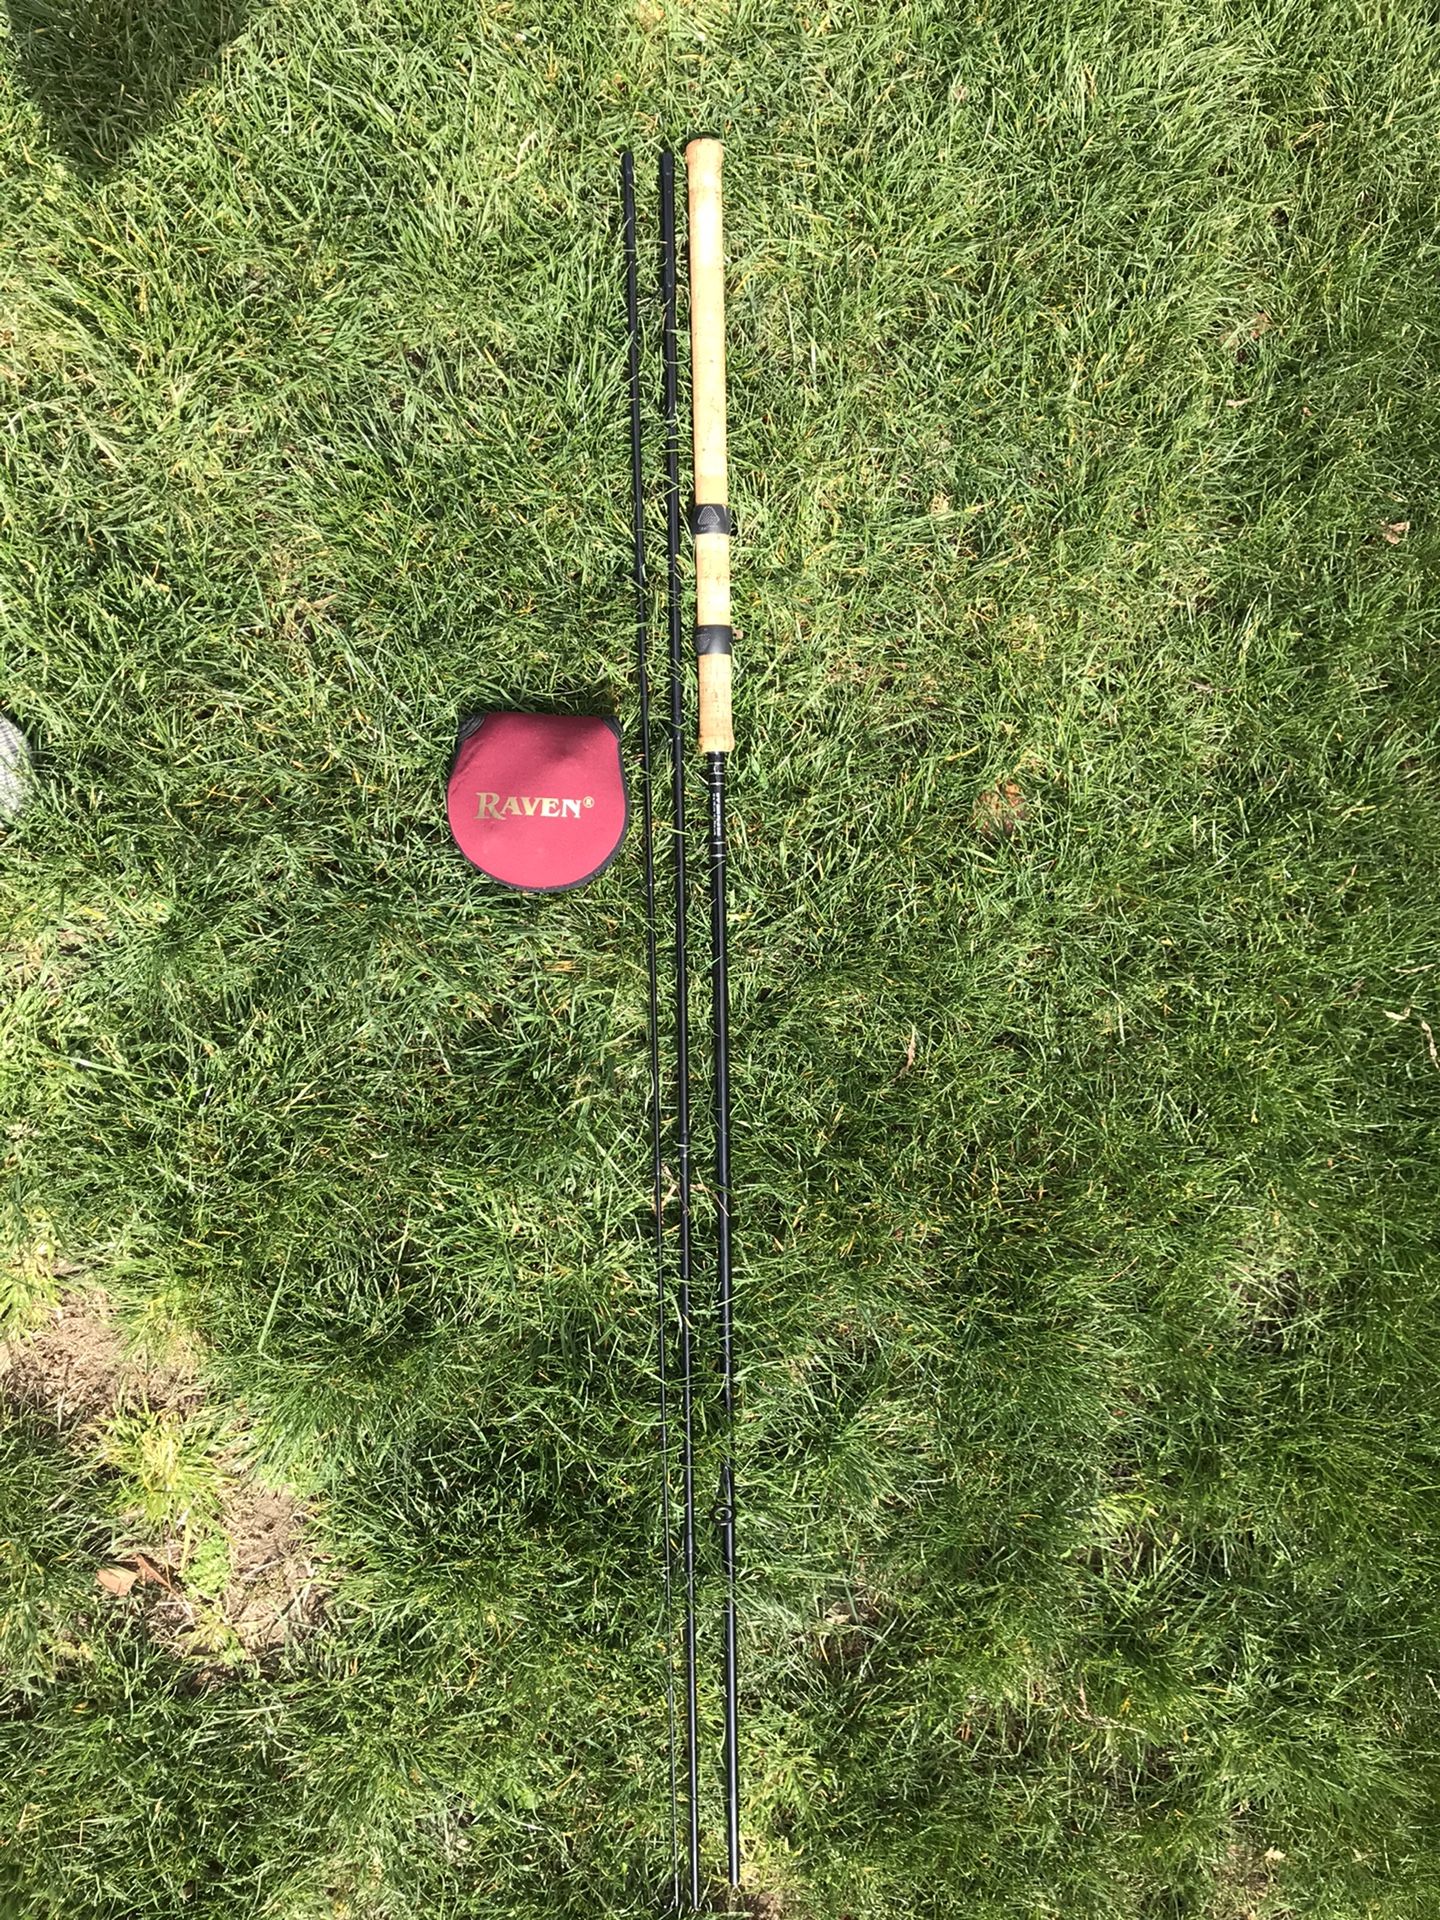 Raven Centerpin Rod & Reel for Sale in Federal Way, WA - OfferUp